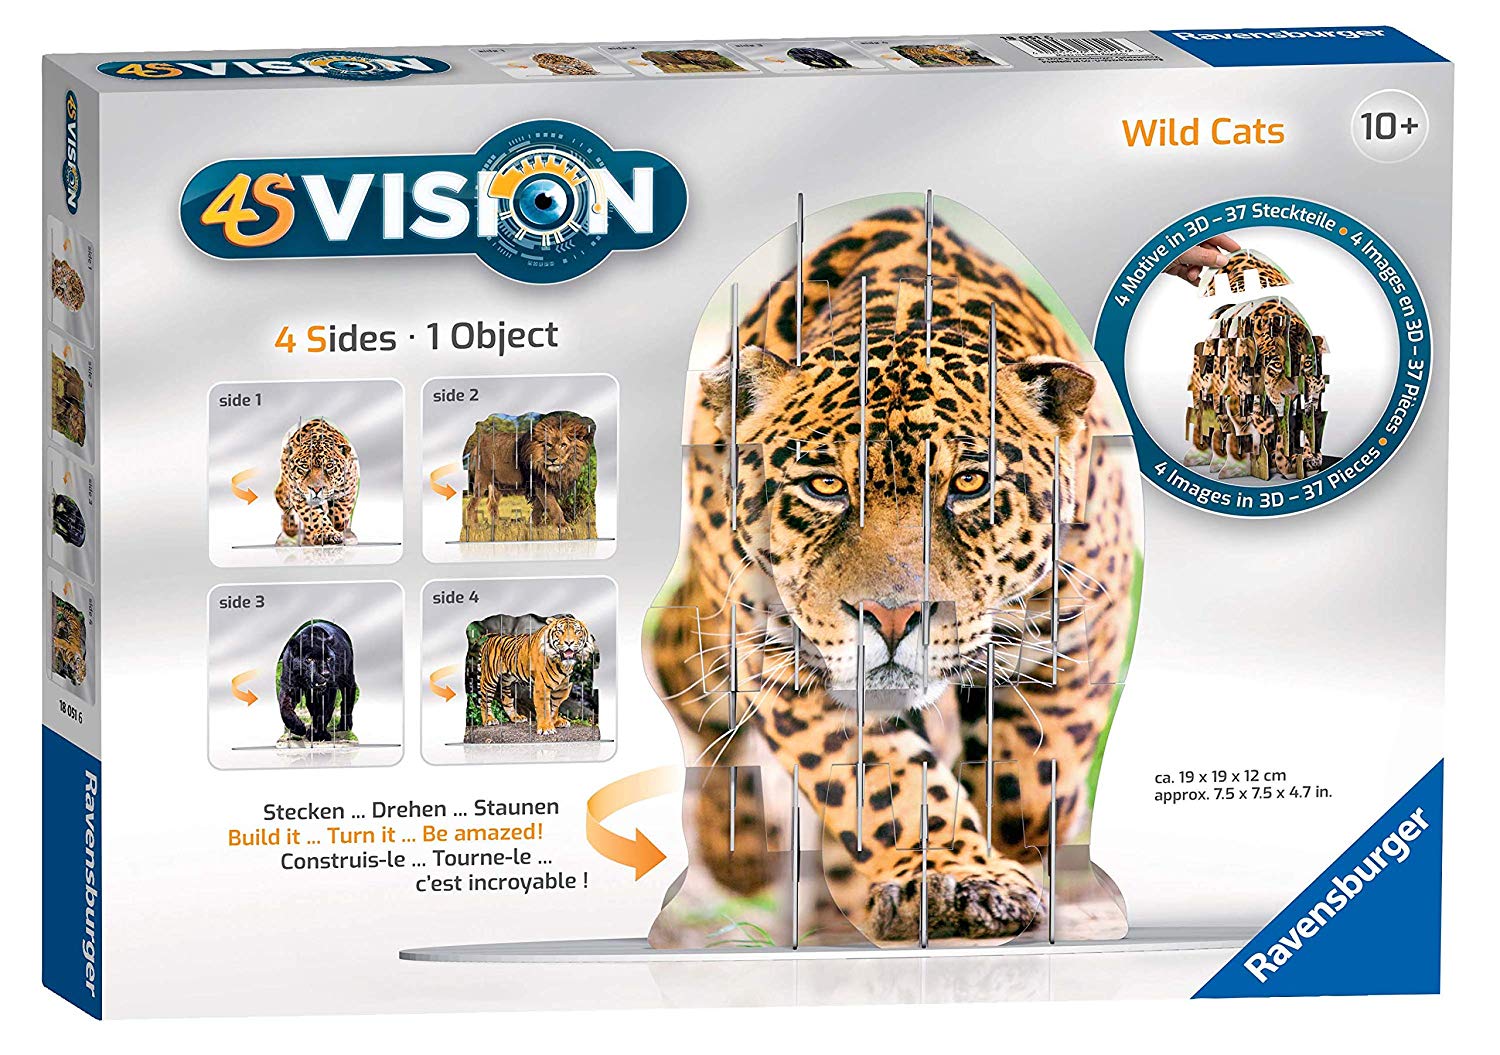 Ravensburger S Vision Wild Cats Toy